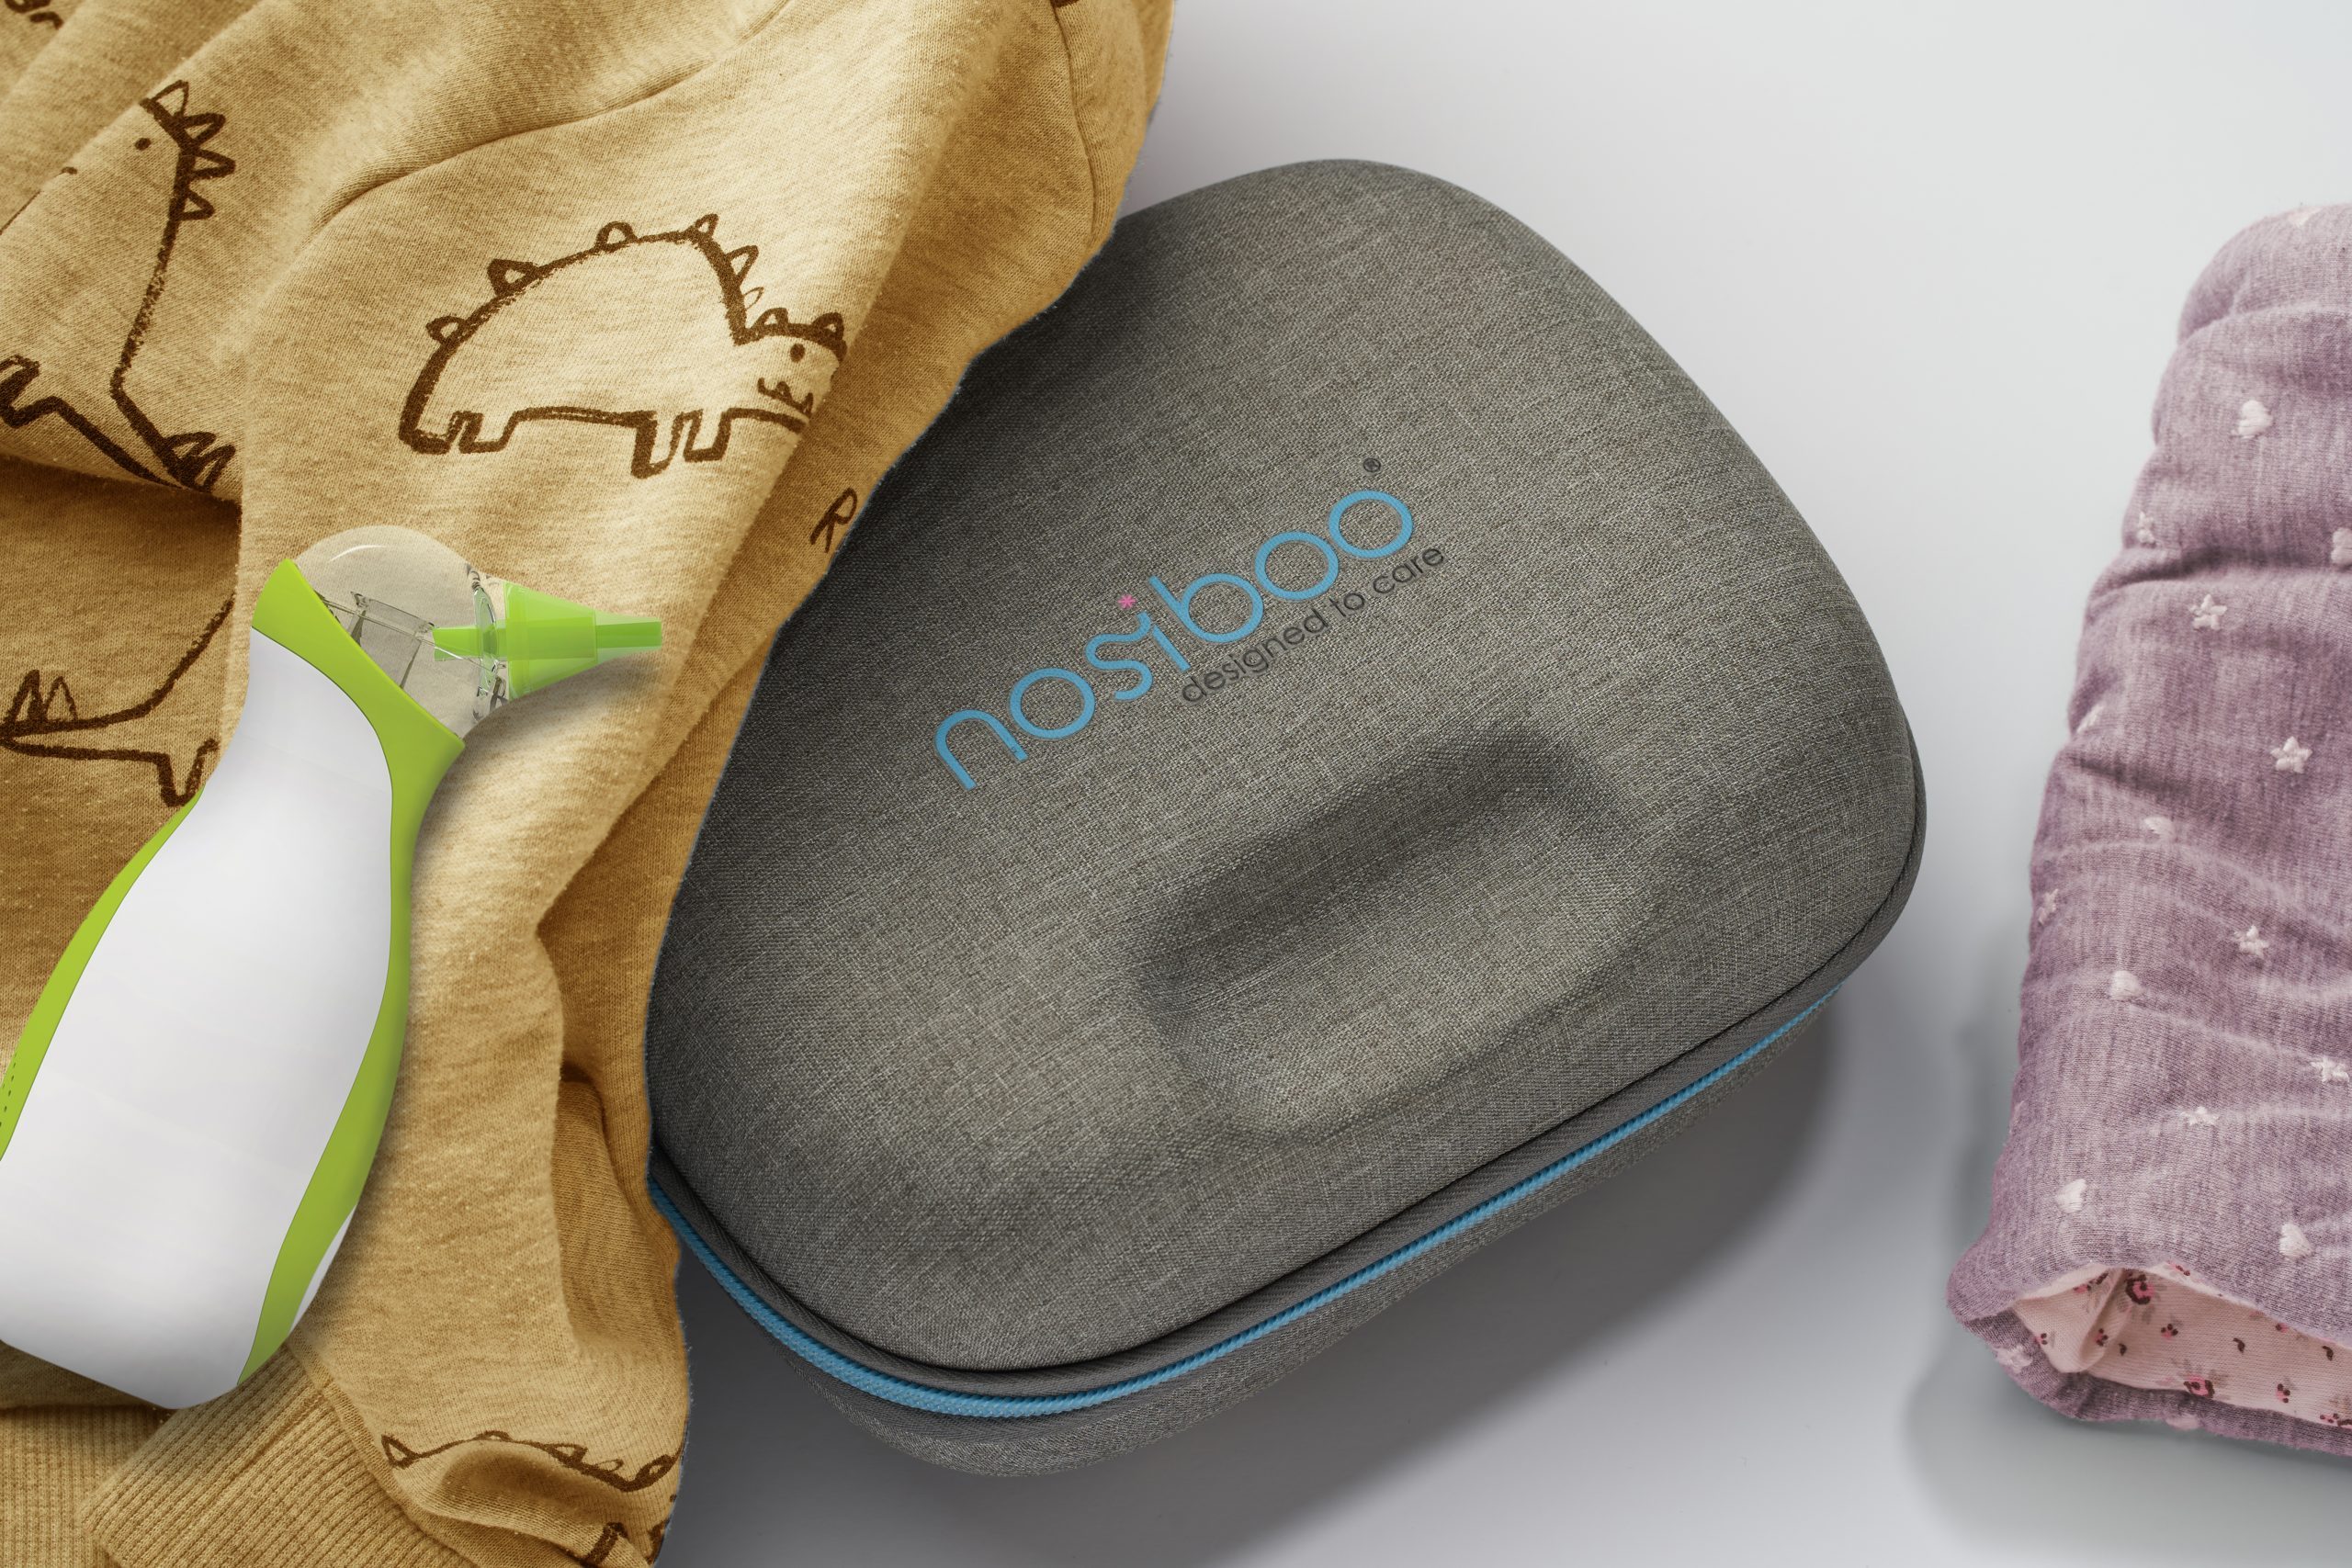 A Nosiboo Bag Go Travel Case placed on a table and covered with a cloth, with a Nosiboo Go portable nasal aspirator next to it.